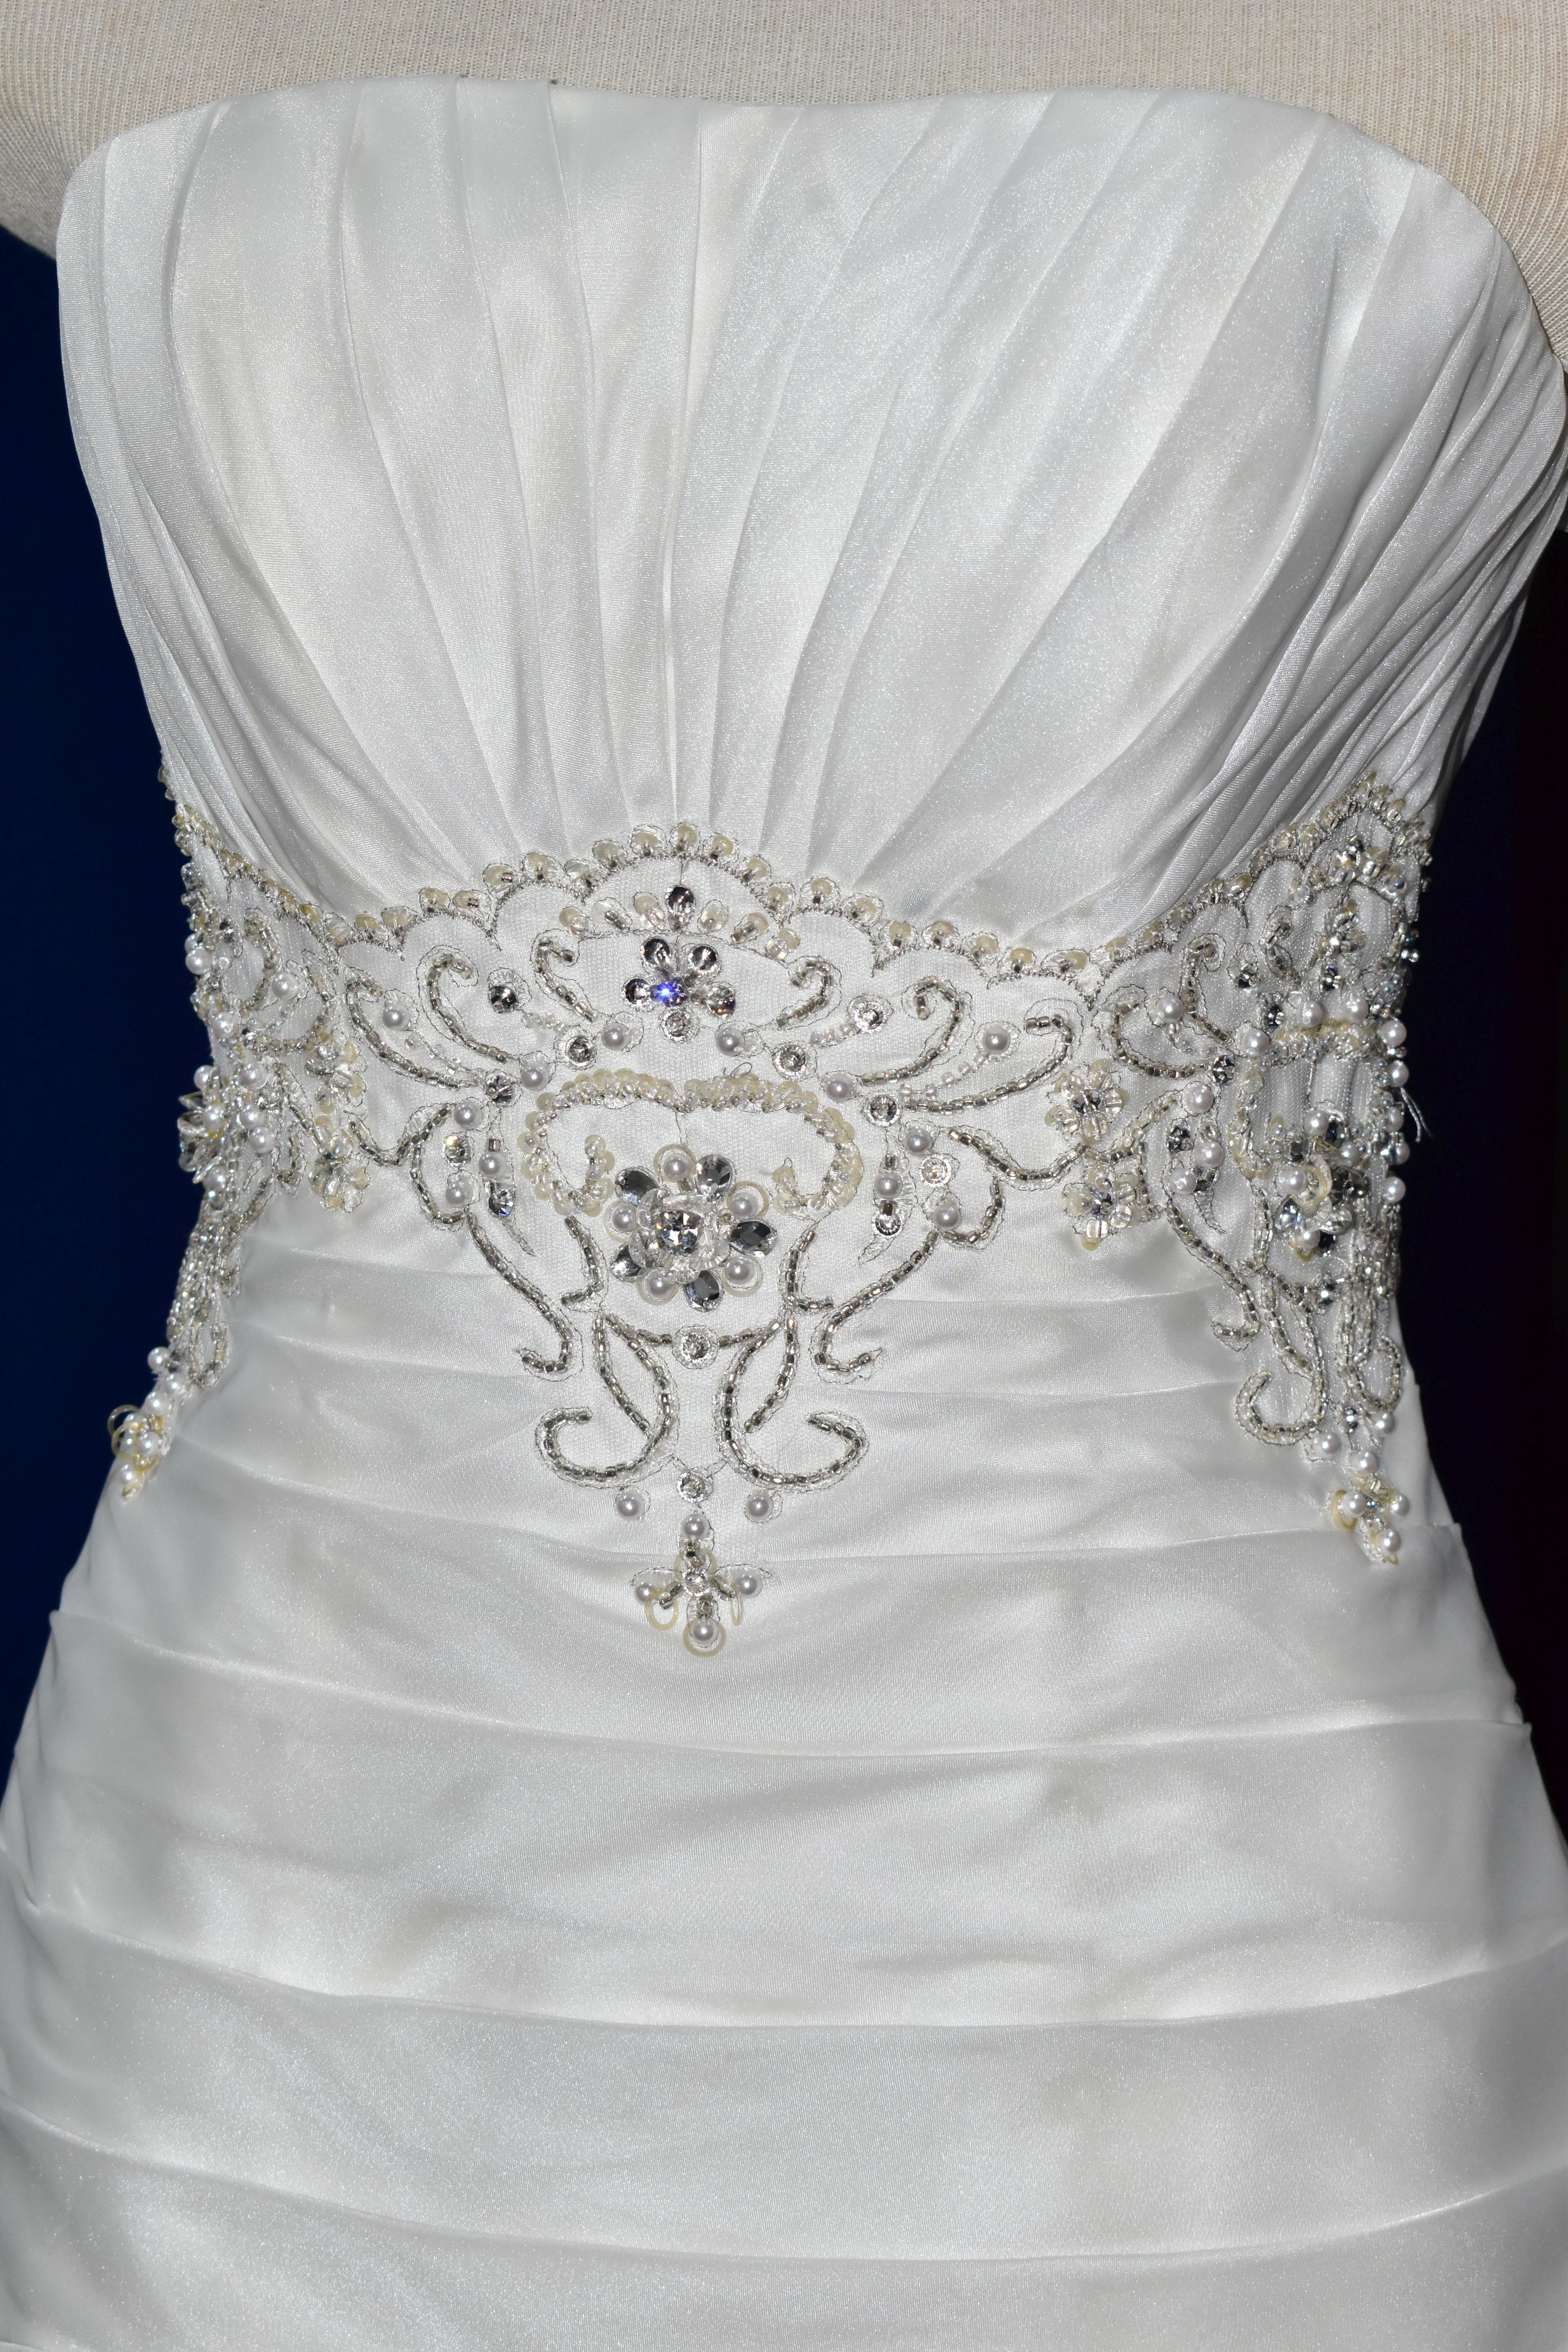 WEDDING GOWN, white strapless gown, pleated bodice pearl and beaded appliques, size 10 (1) - Image 3 of 14